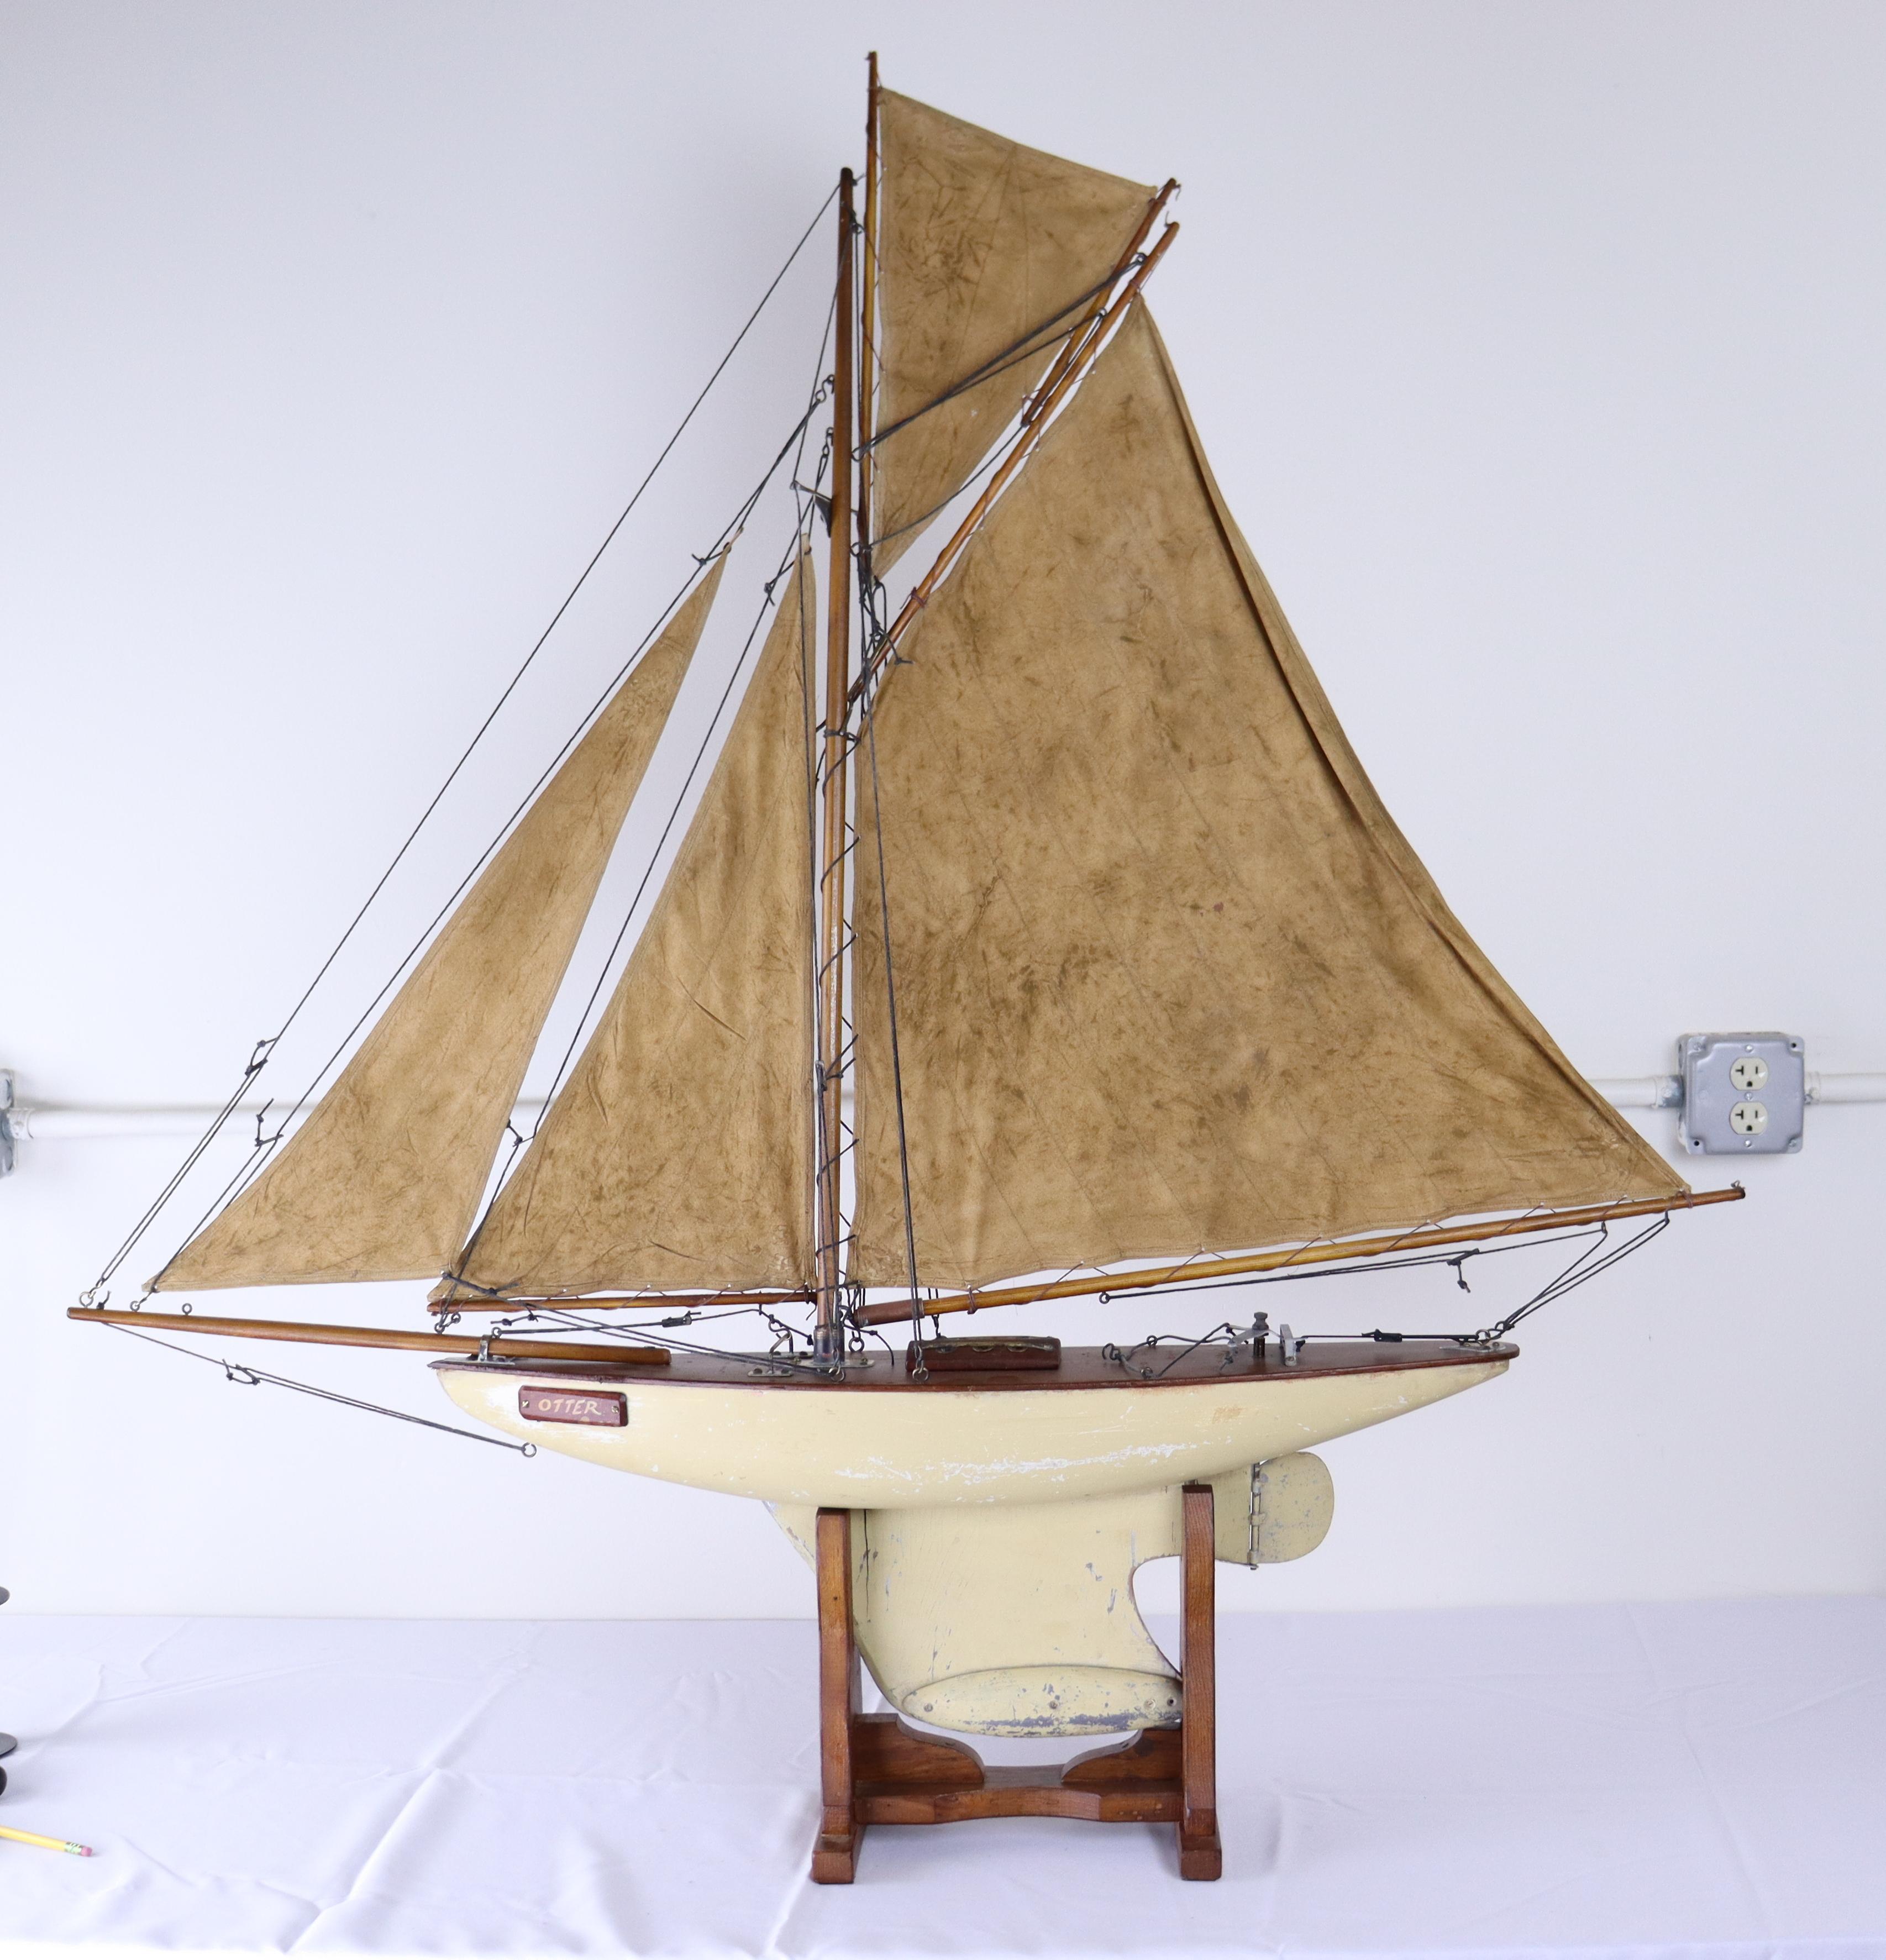 The largest vintage model yacht we have ever had in the store!  Christened 